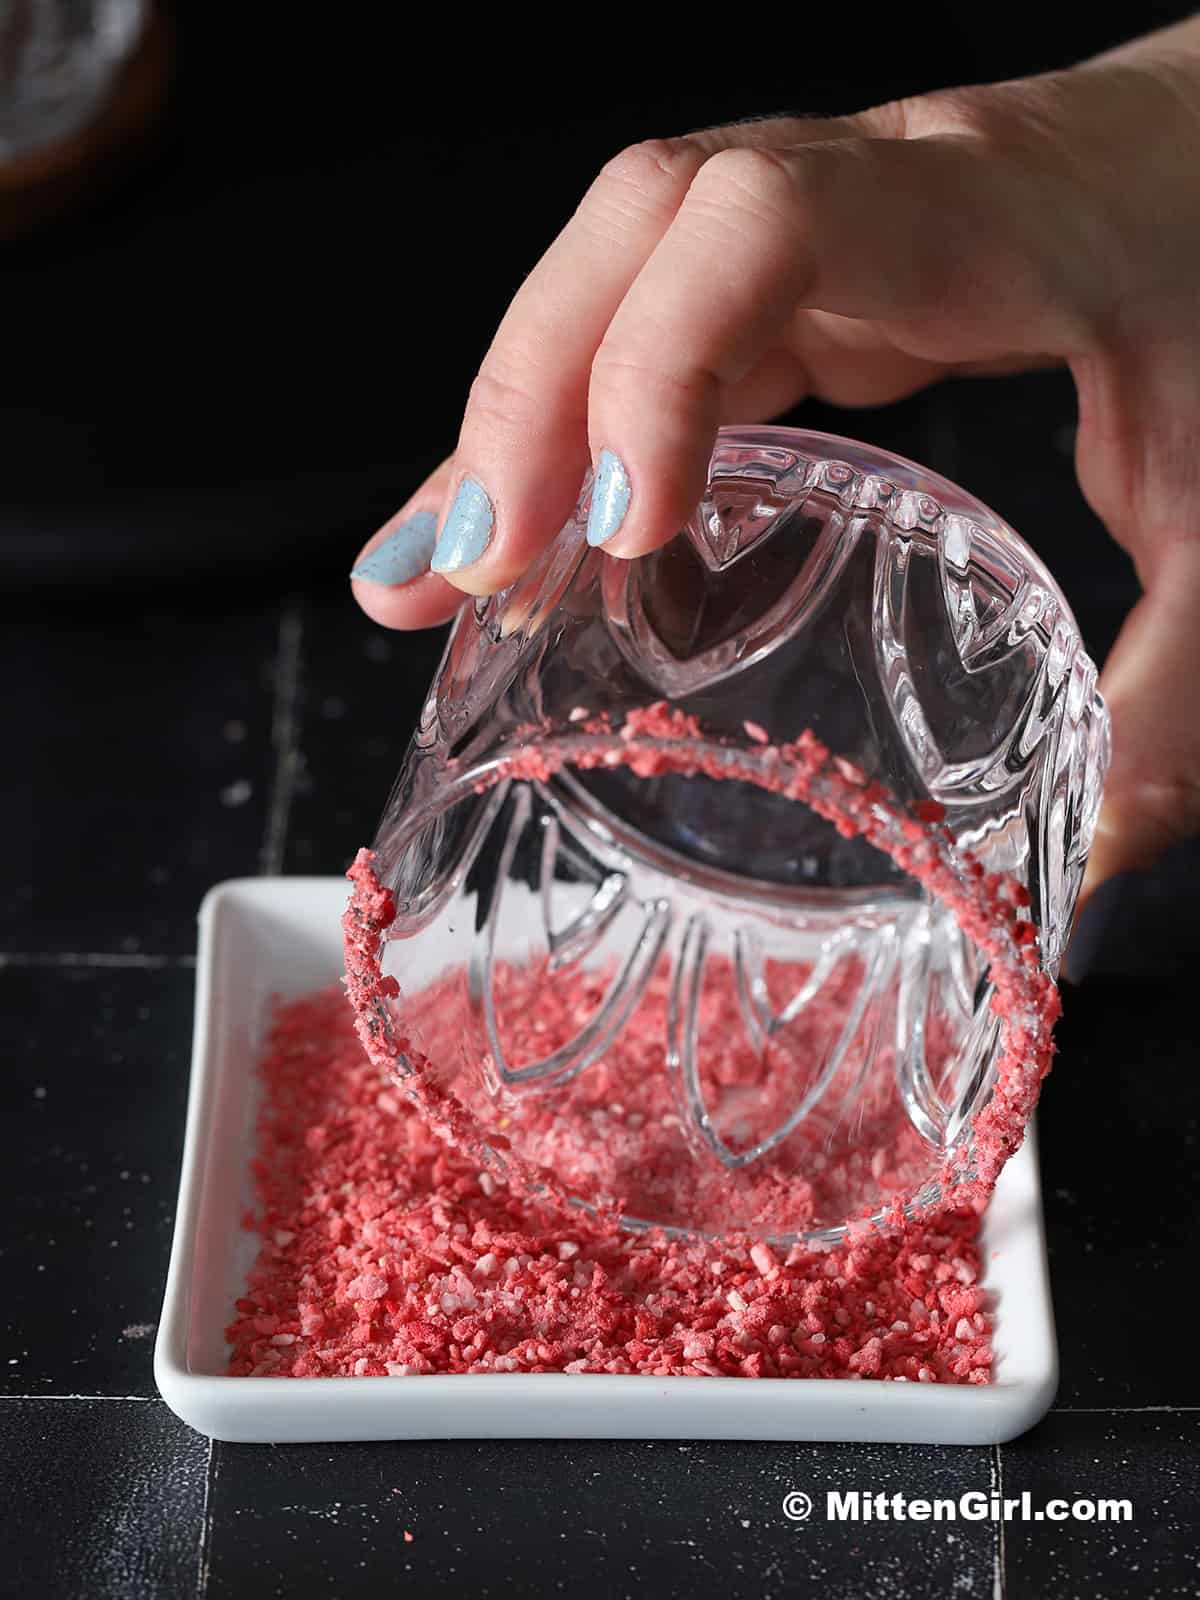 A glass being run through a plate of salt and crushed freeze-dried strawberries.